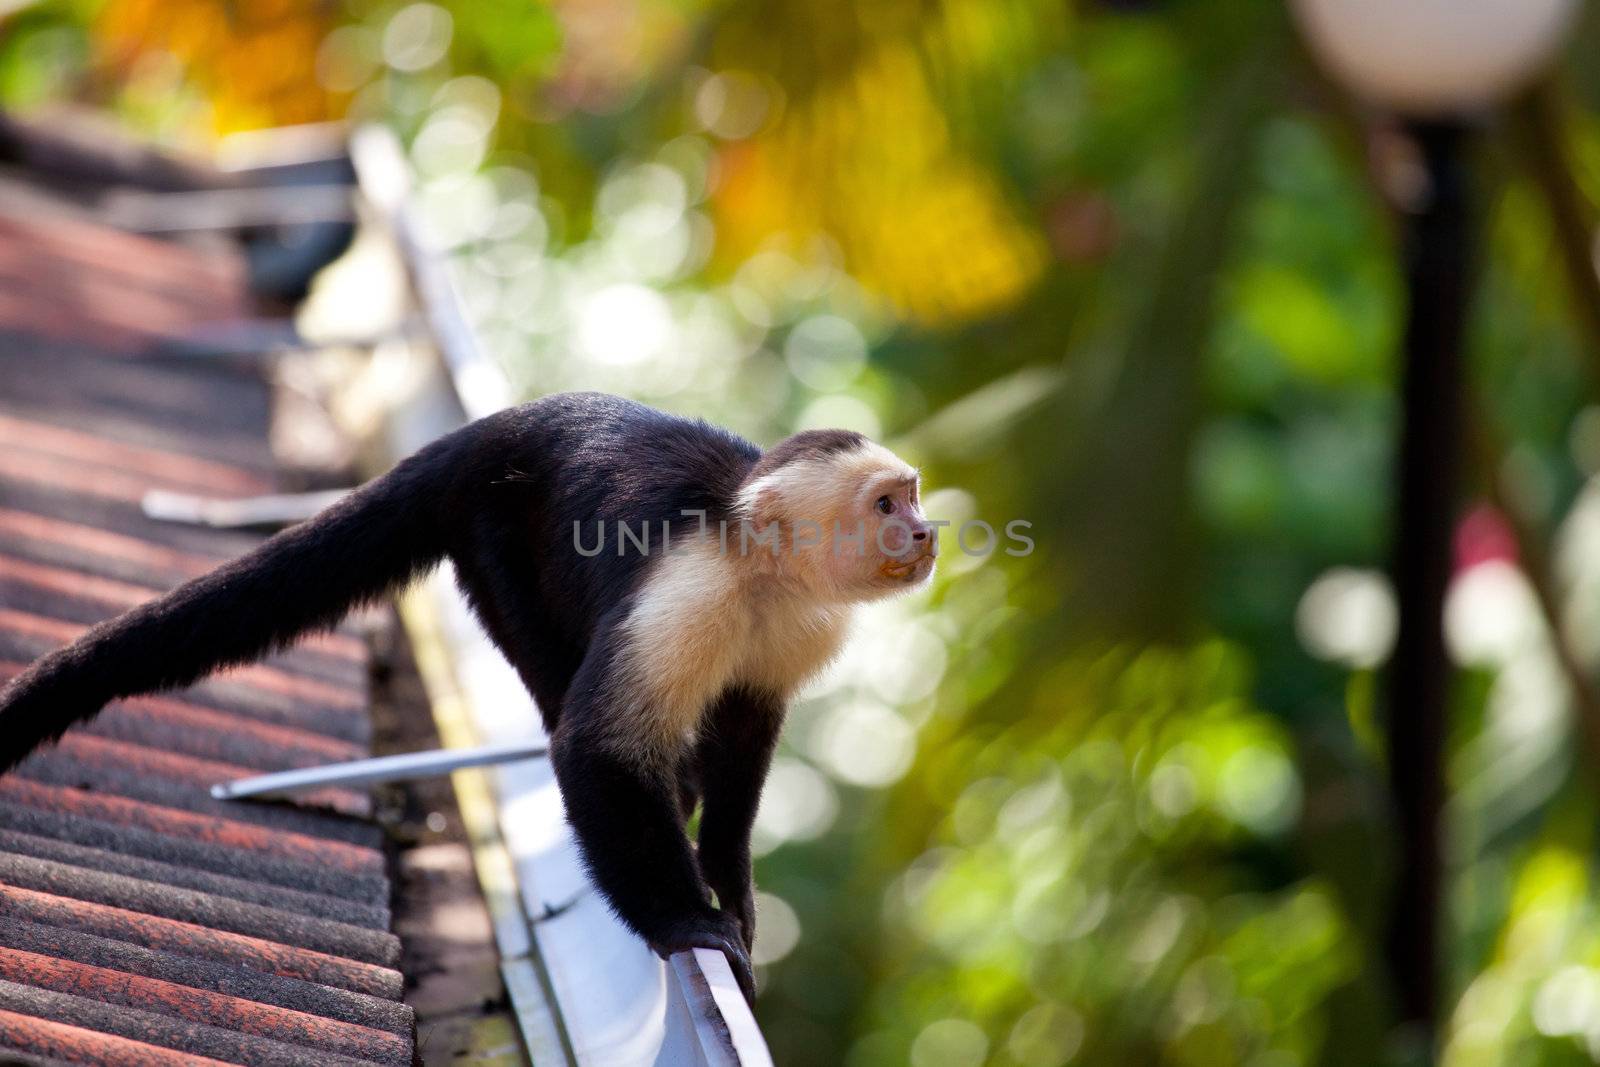 White faced capuchin monkey roaming around on the rooftops